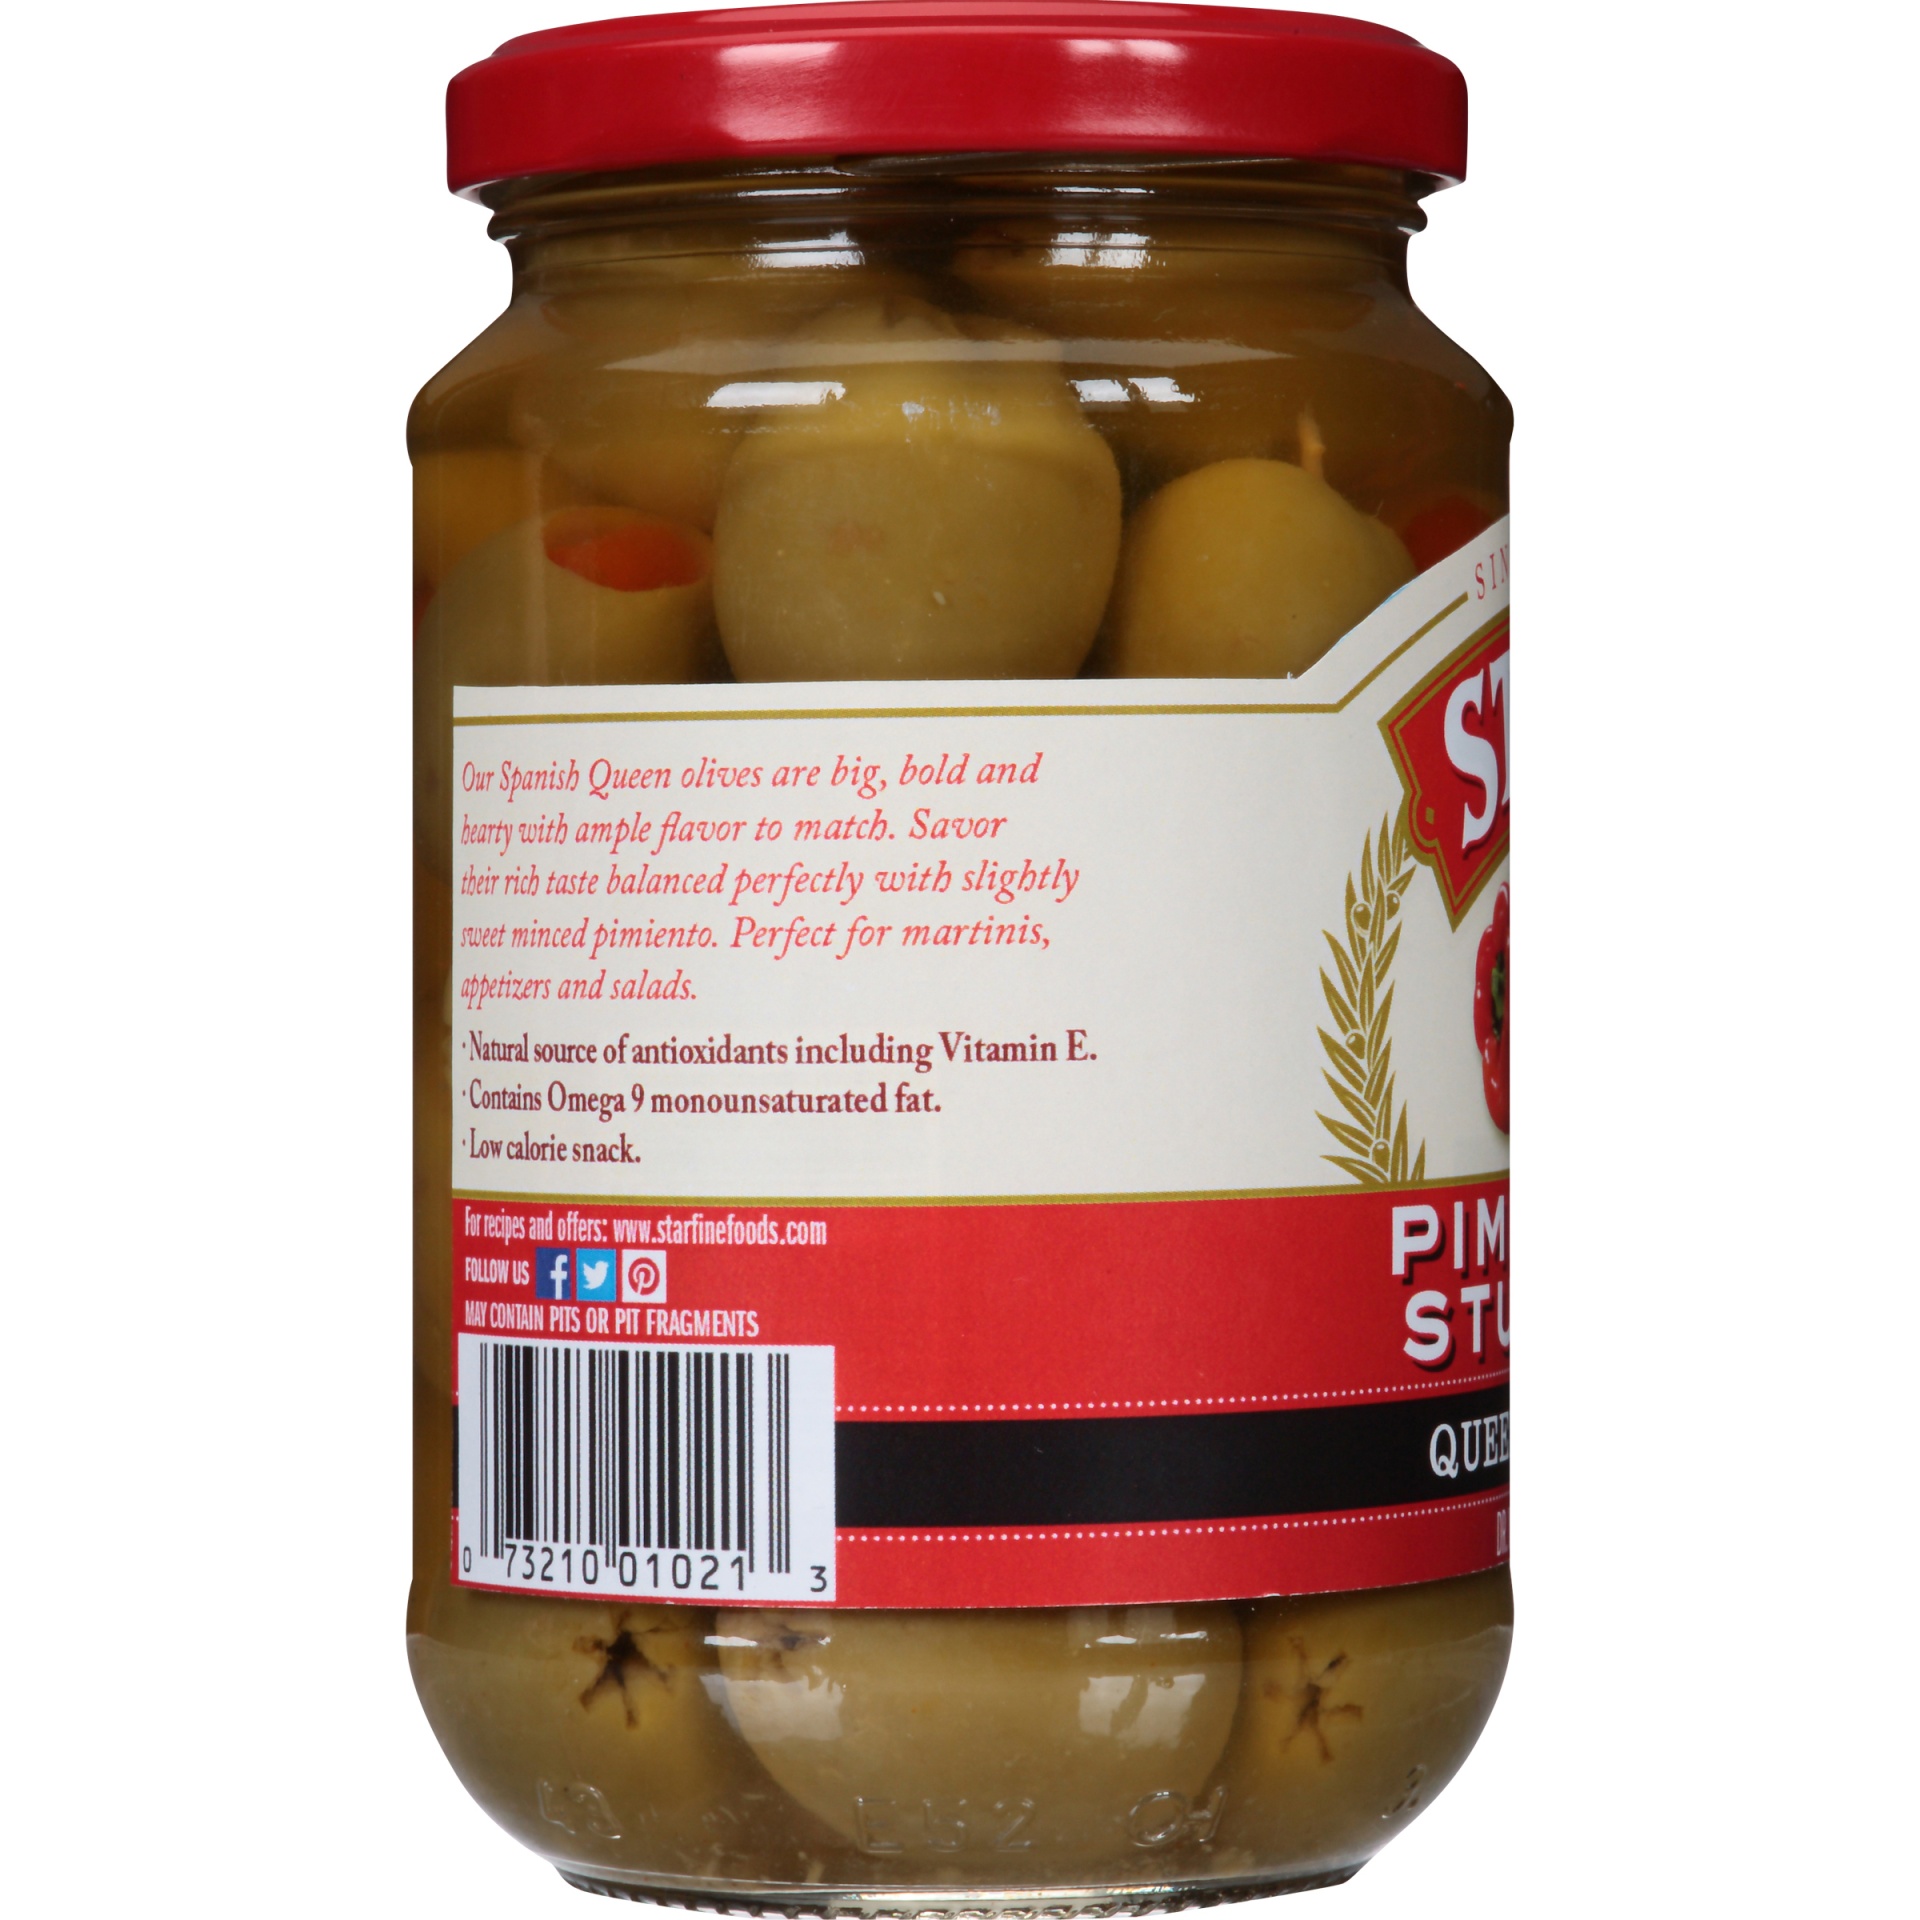 slide 2 of 6, STAR Pimiento Stuffed Queen Olives, 7 oz